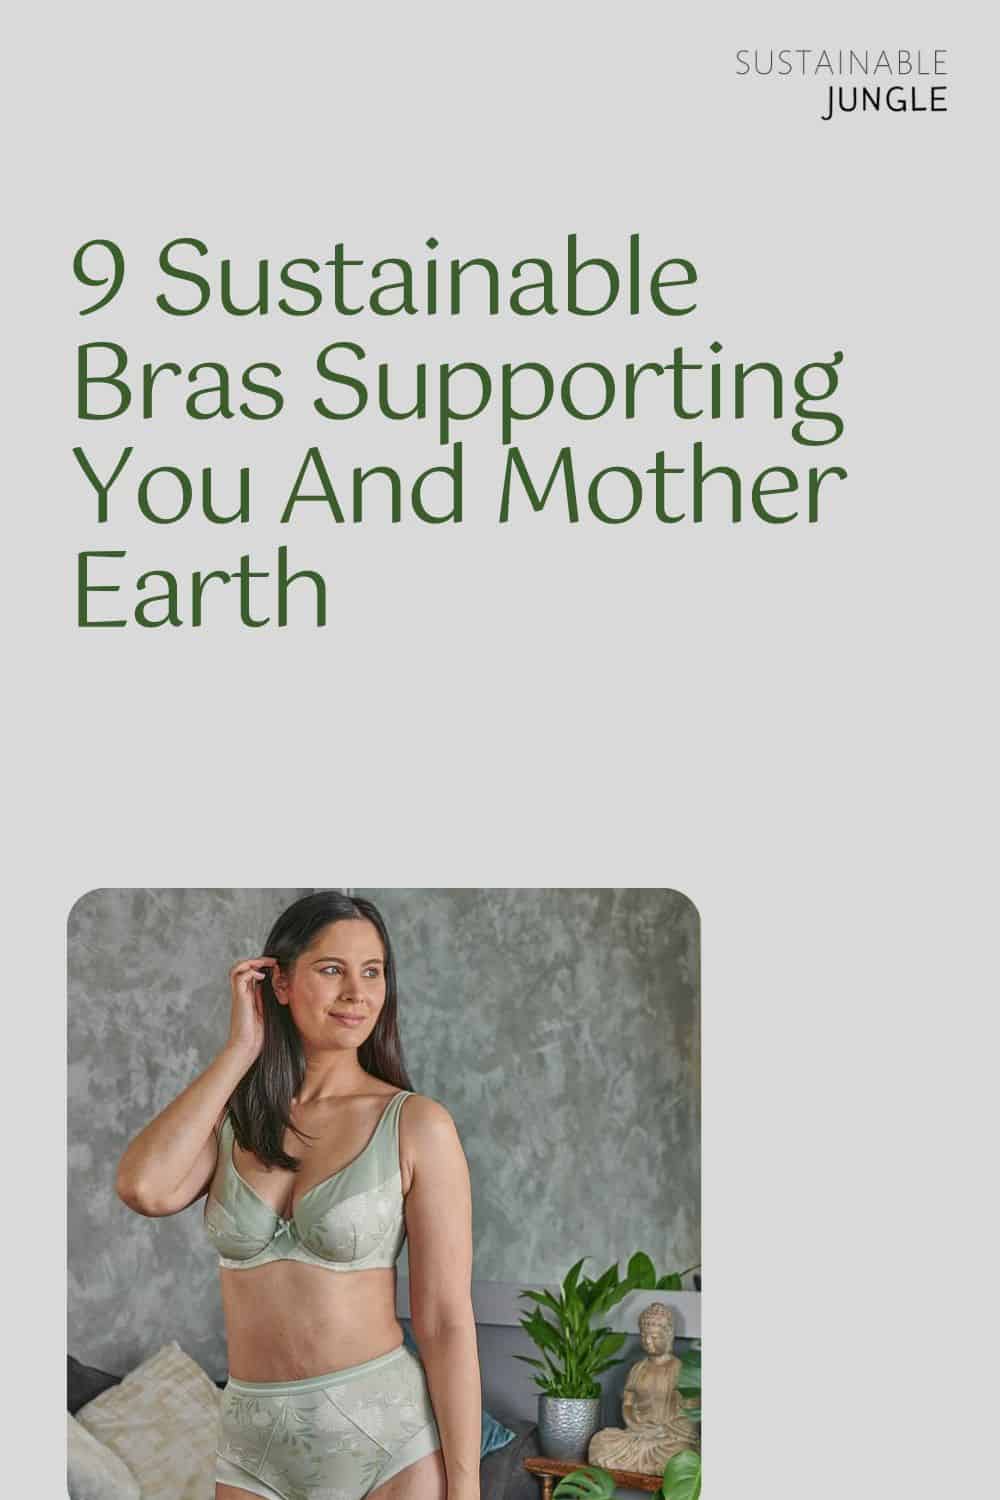 9 Sustainable Bras Supporting You And Mother Earth Image by JulieMay #sustainablebras #sustainablebra #bestsustainablebras #organicbras #organiccottonbras #ecofriendlybras #ethicalbras #sustainablejungle